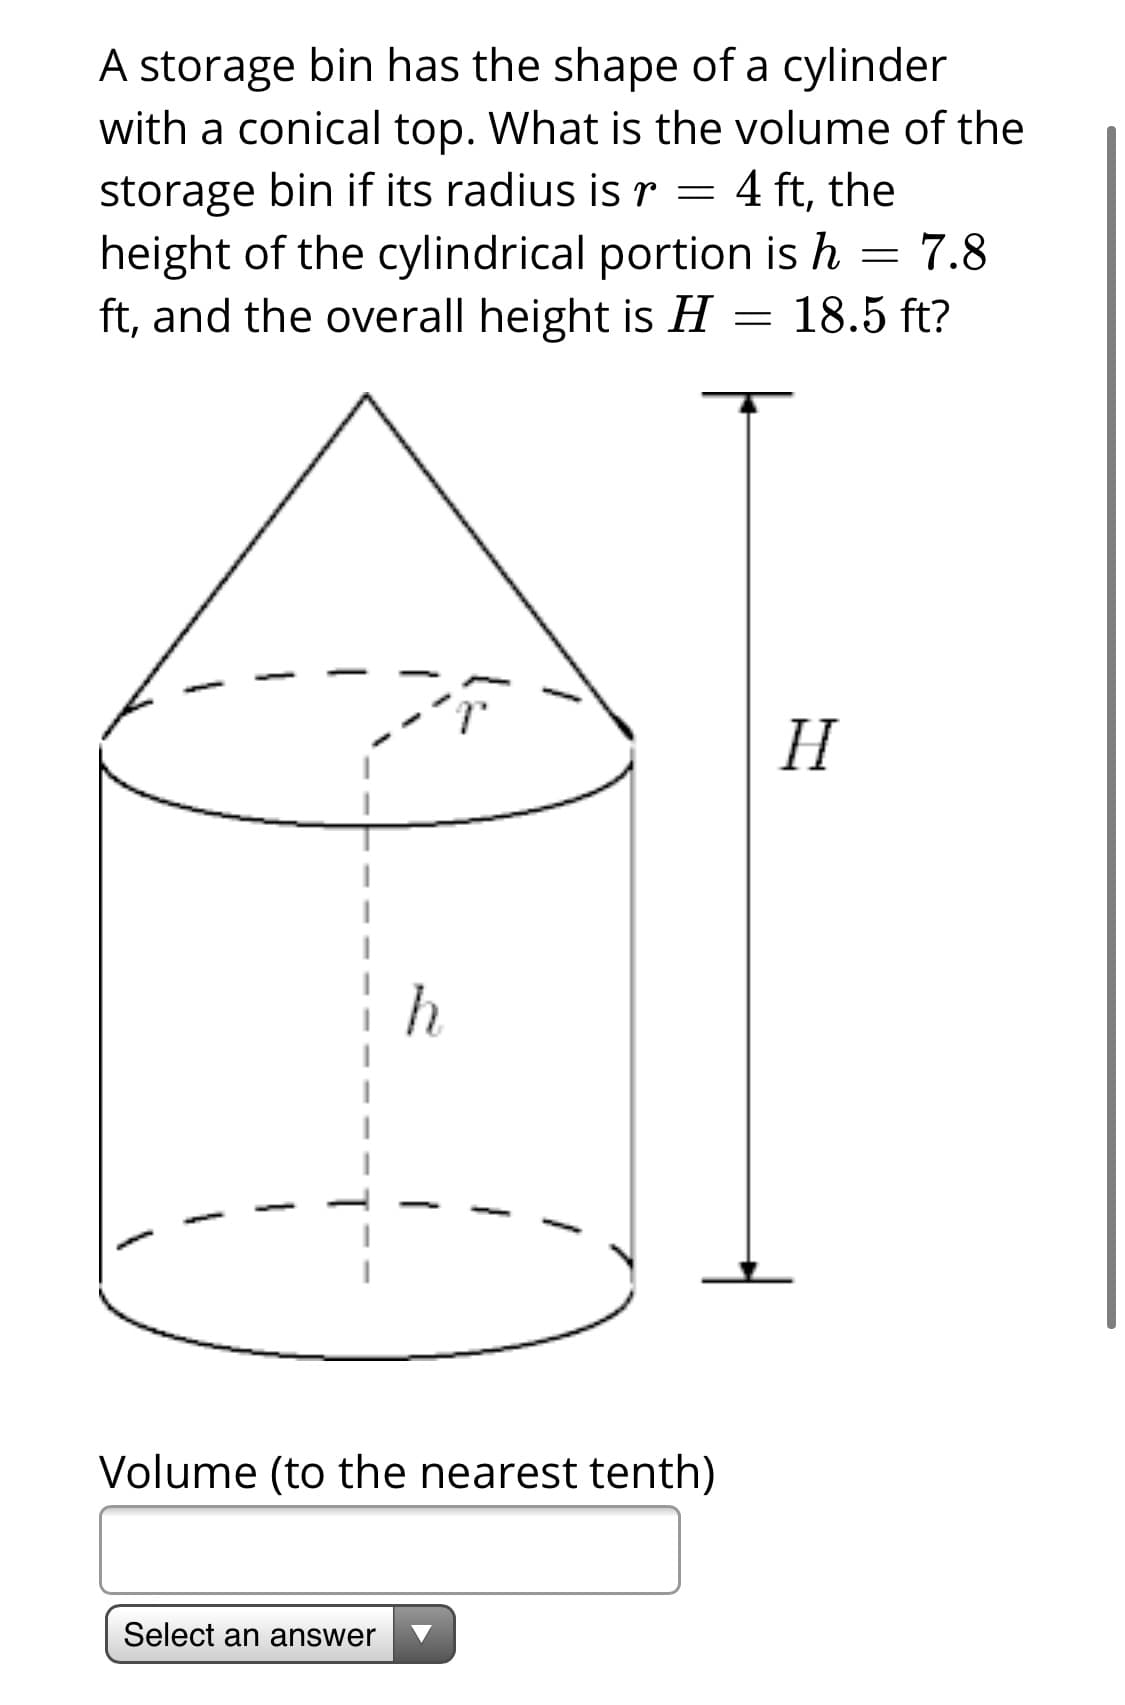 A storage bin has the shape of a cylinder
with a conical top. What is the volume of the
storage bin if its radius is r = 4 ft, the
height of the cylindrical portion is h = 7.8
ft, and the overall height is H =
18.5 ft?
H
Volume (to the nearest tenth)
Select an answer
